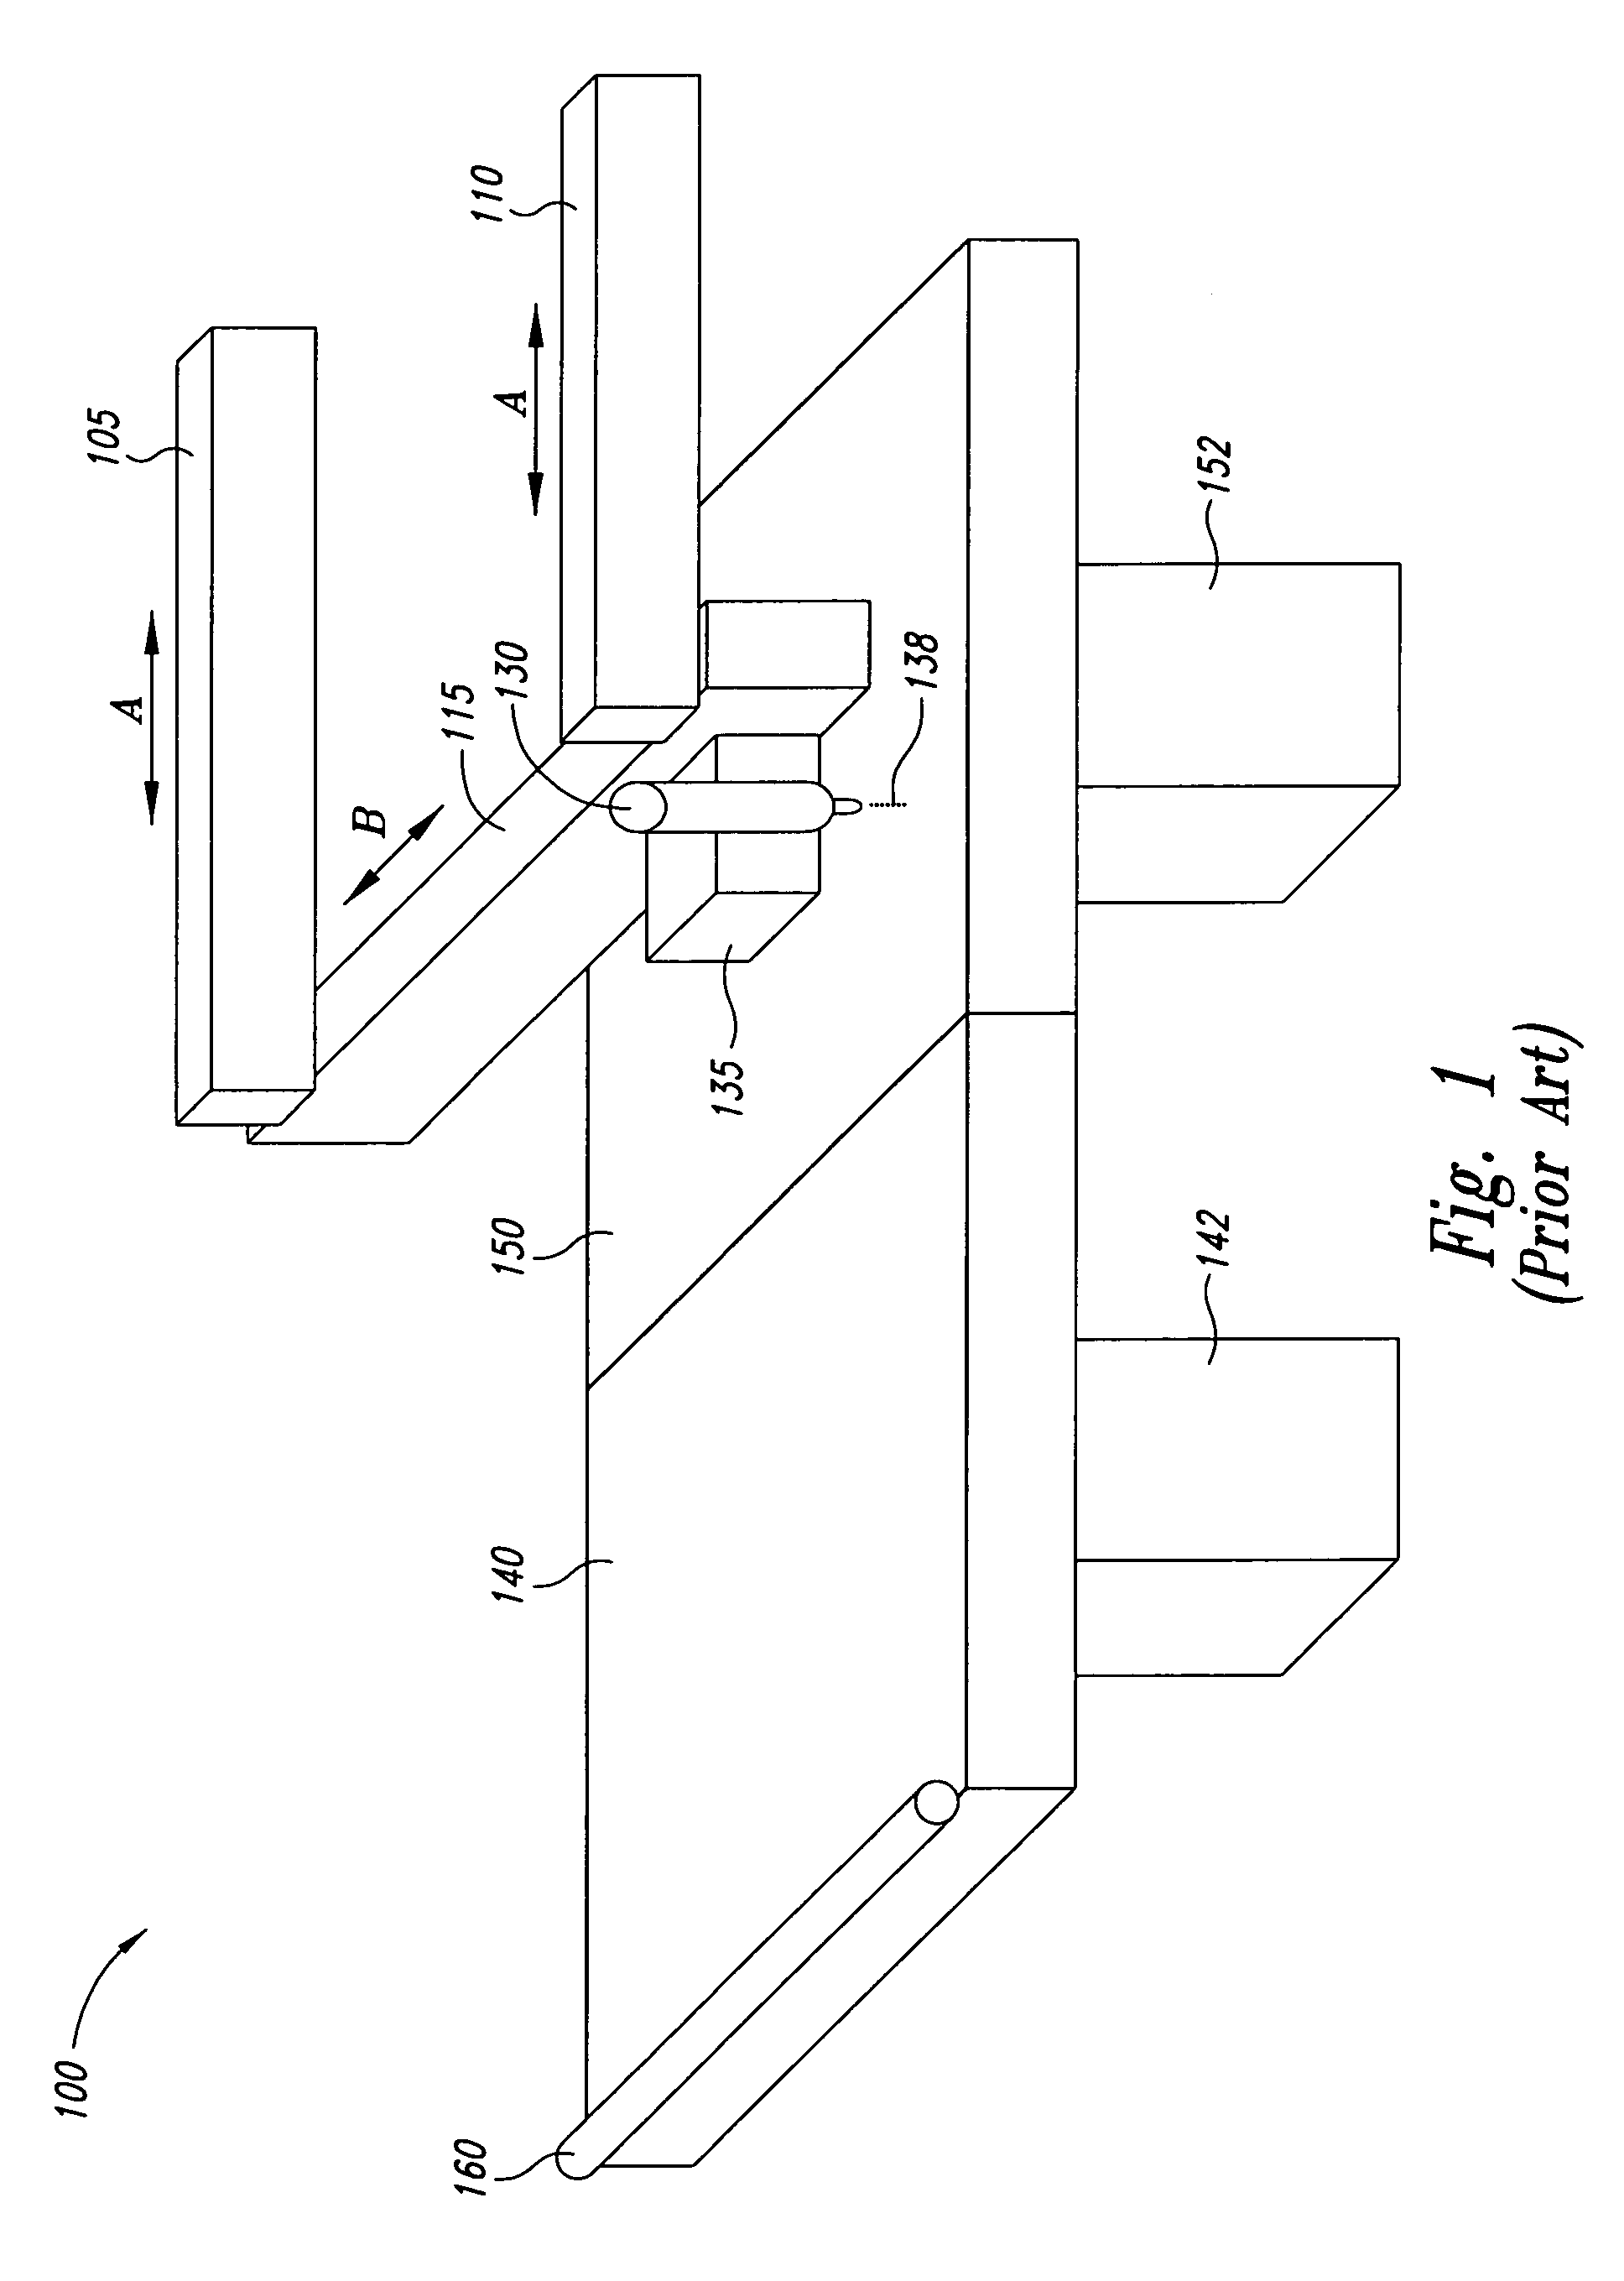 Method and apparatus for engineered regenerative biostructures such as hydroxyapatite substrates for bone healing applications